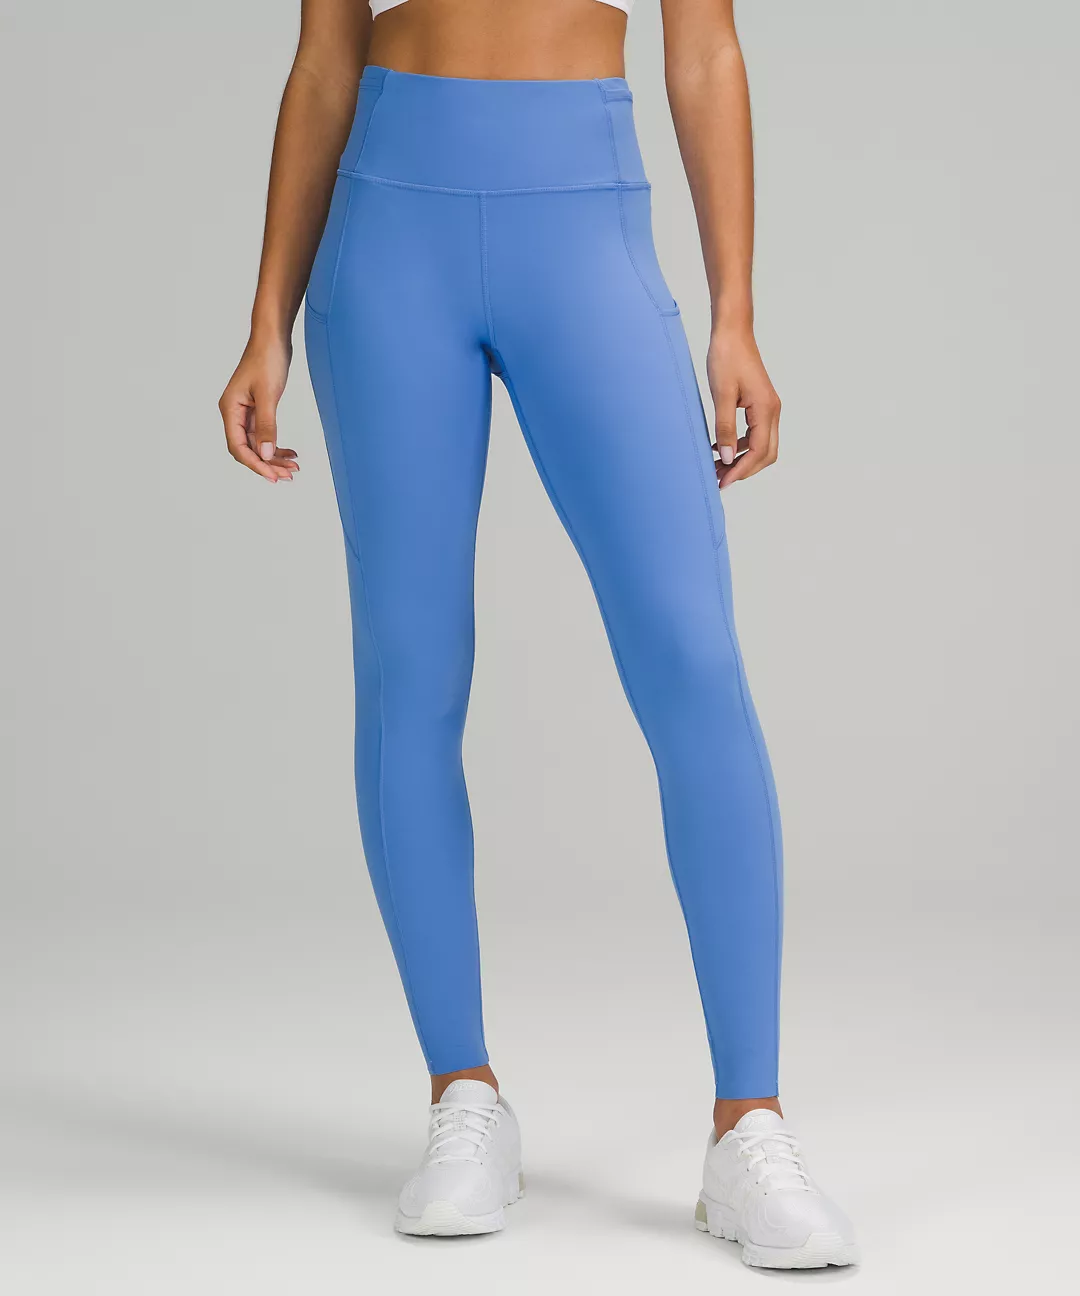 A lululemon Fast and Free Brushed Fabric High-Rise Tight 28"